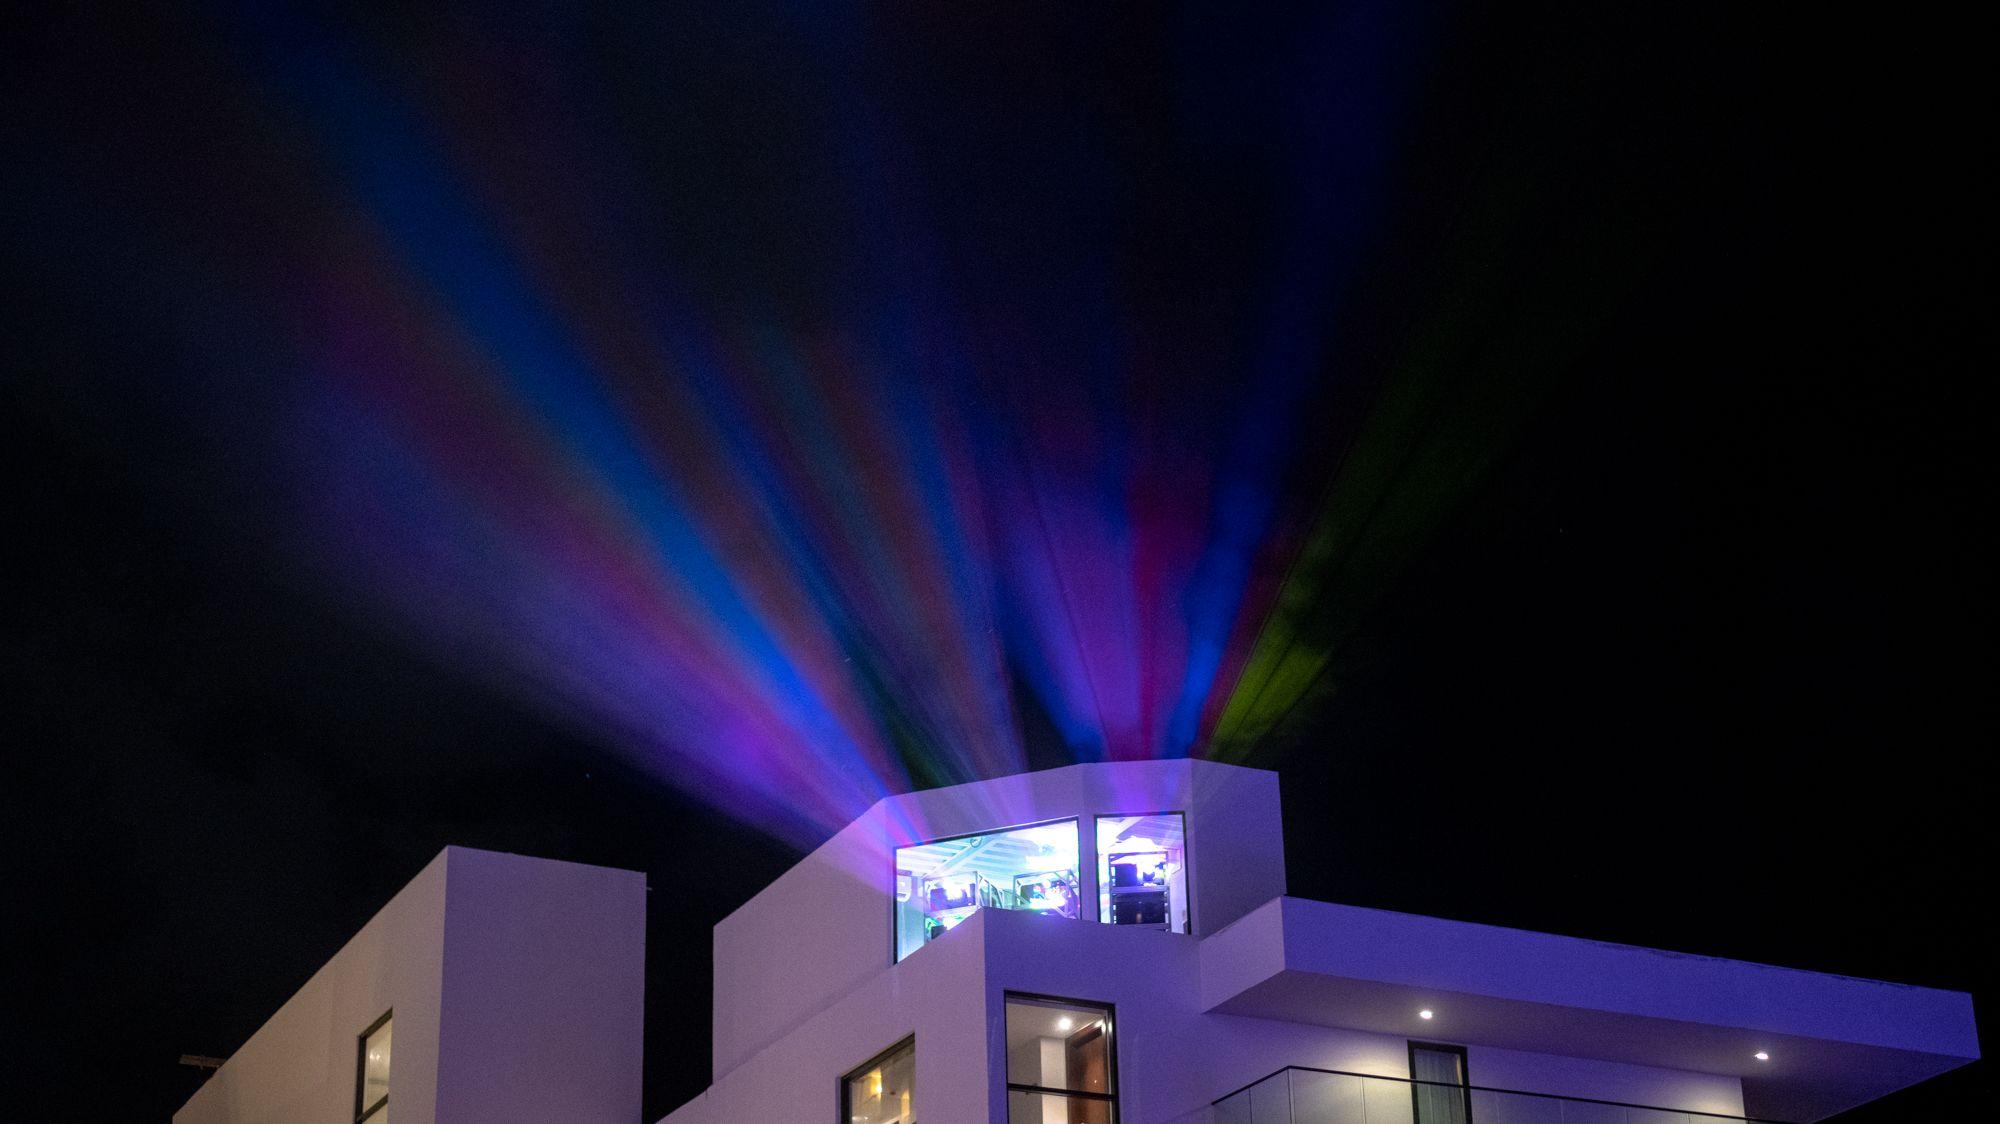 Projectors shining onto the Melody Maker Cancun Hotel